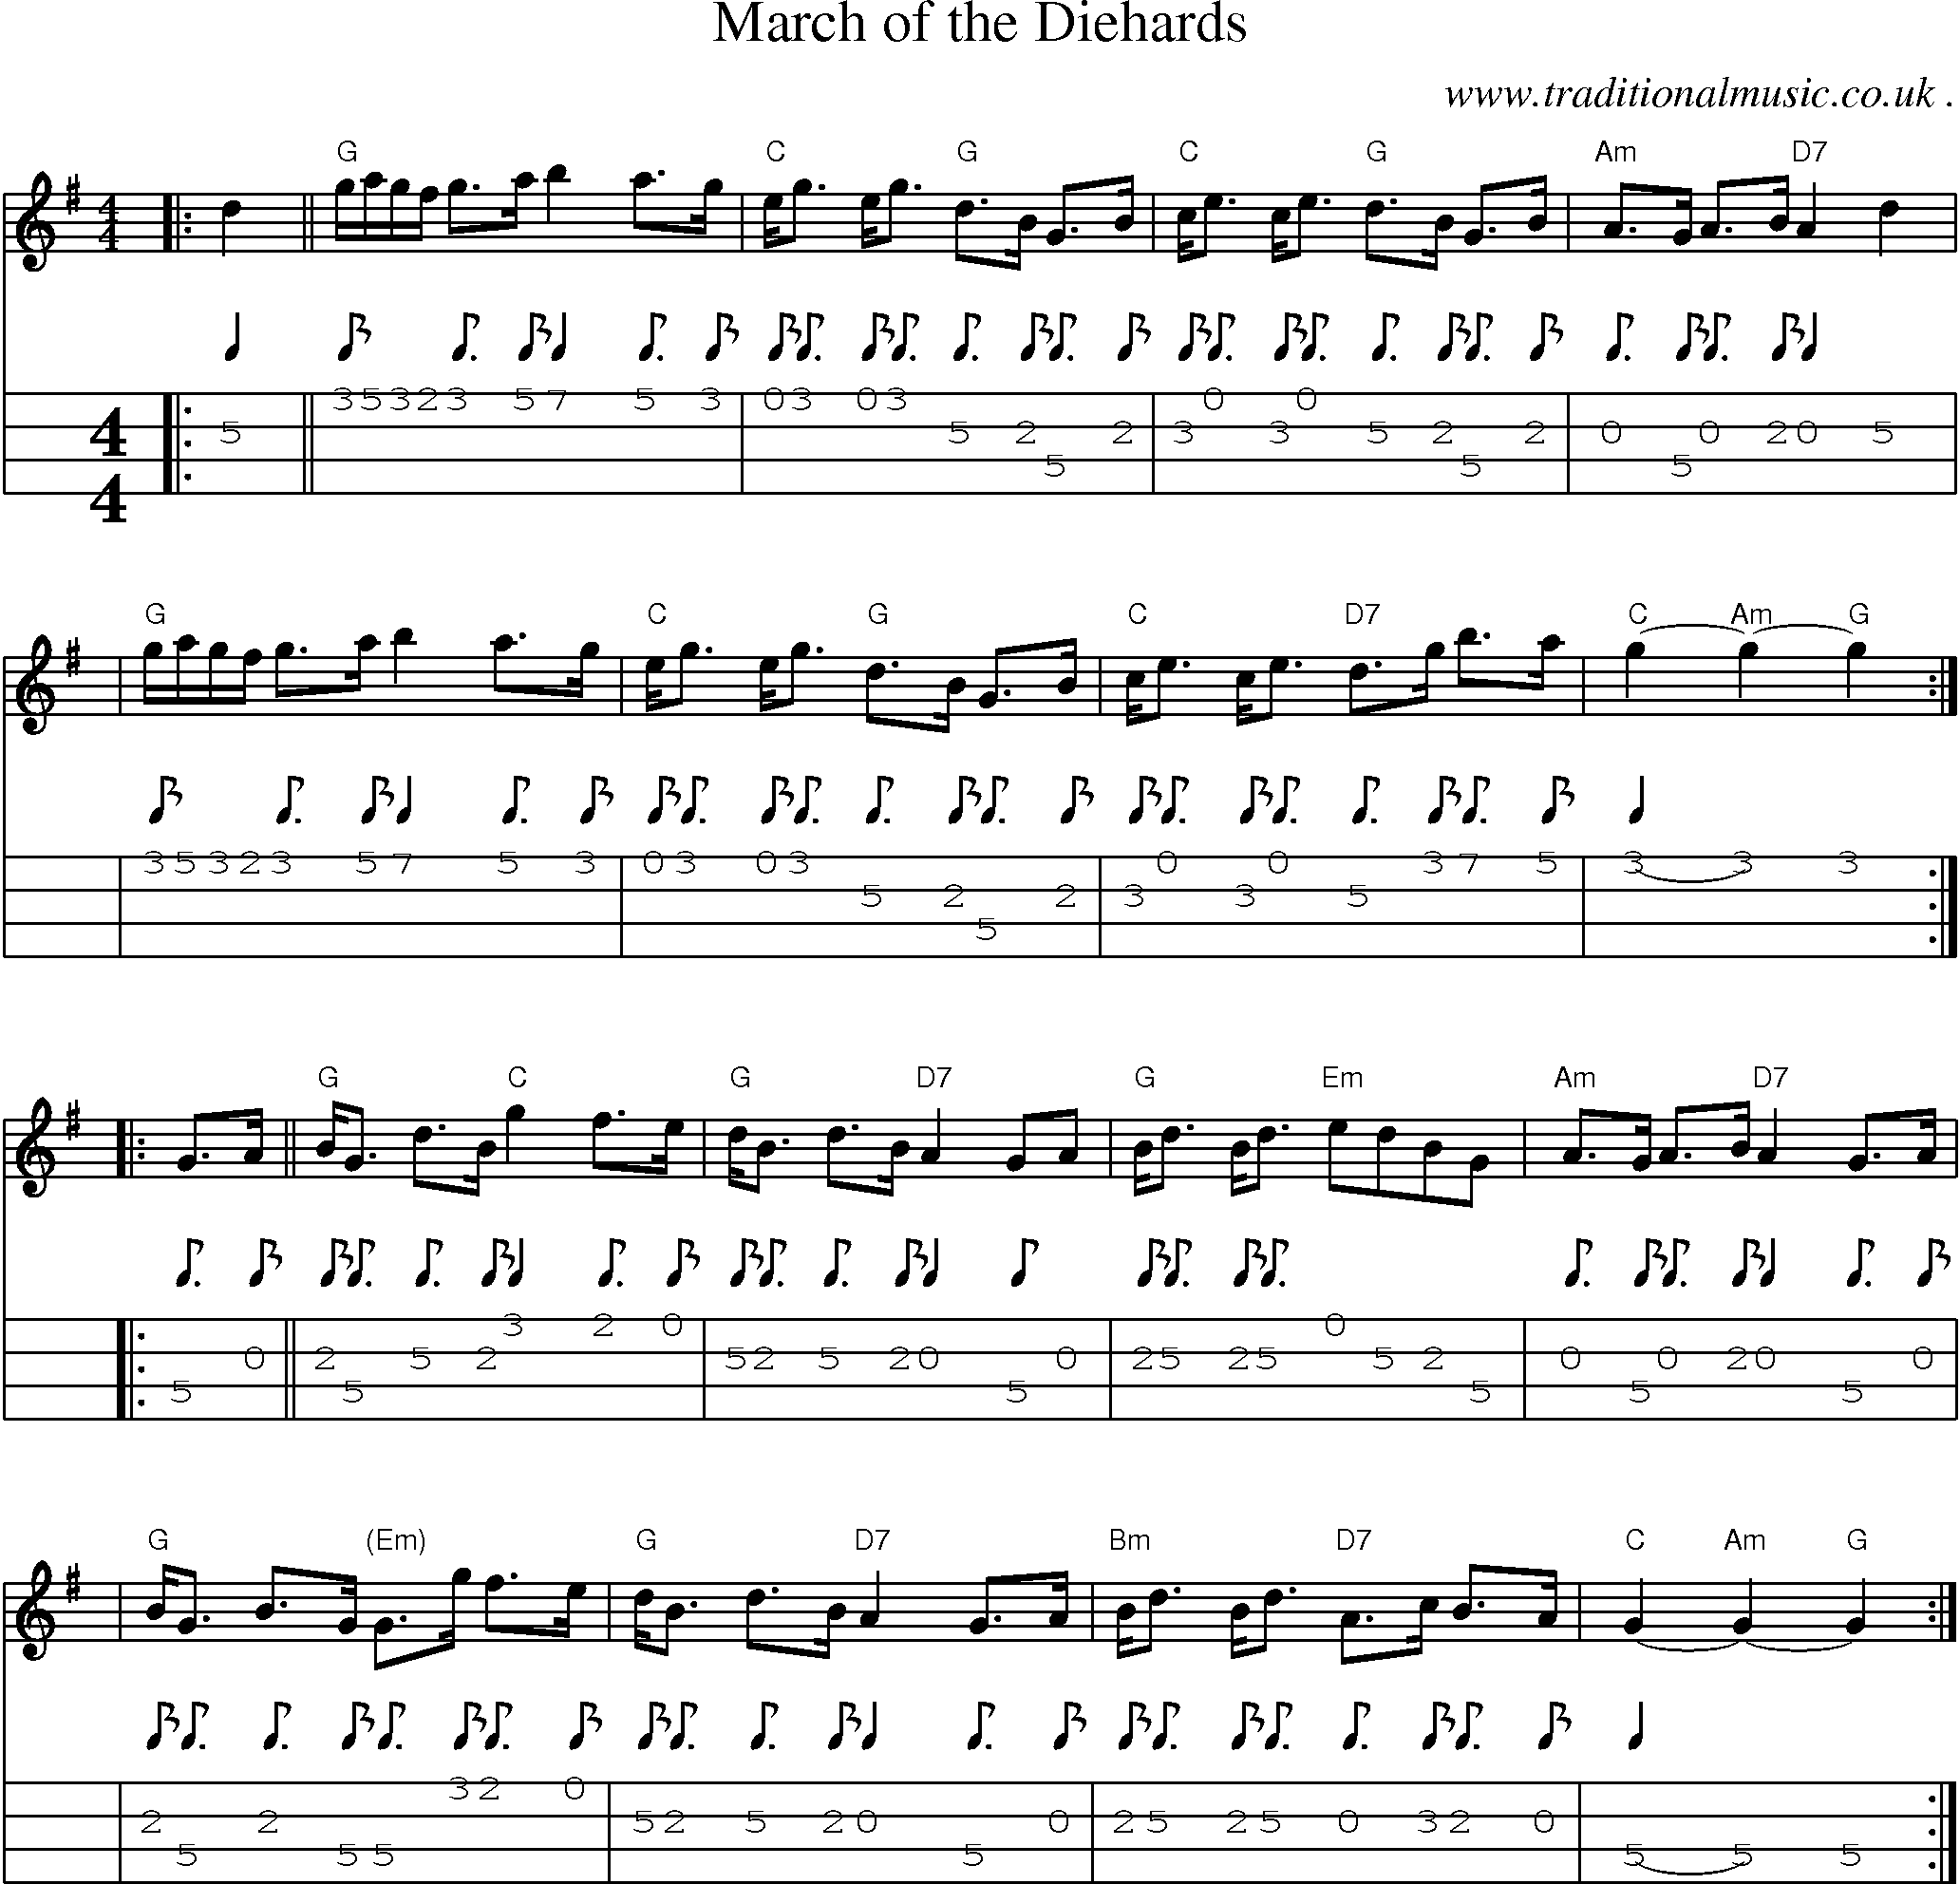 Sheet-music  score, Chords and Mandolin Tabs for March Of The Diehards